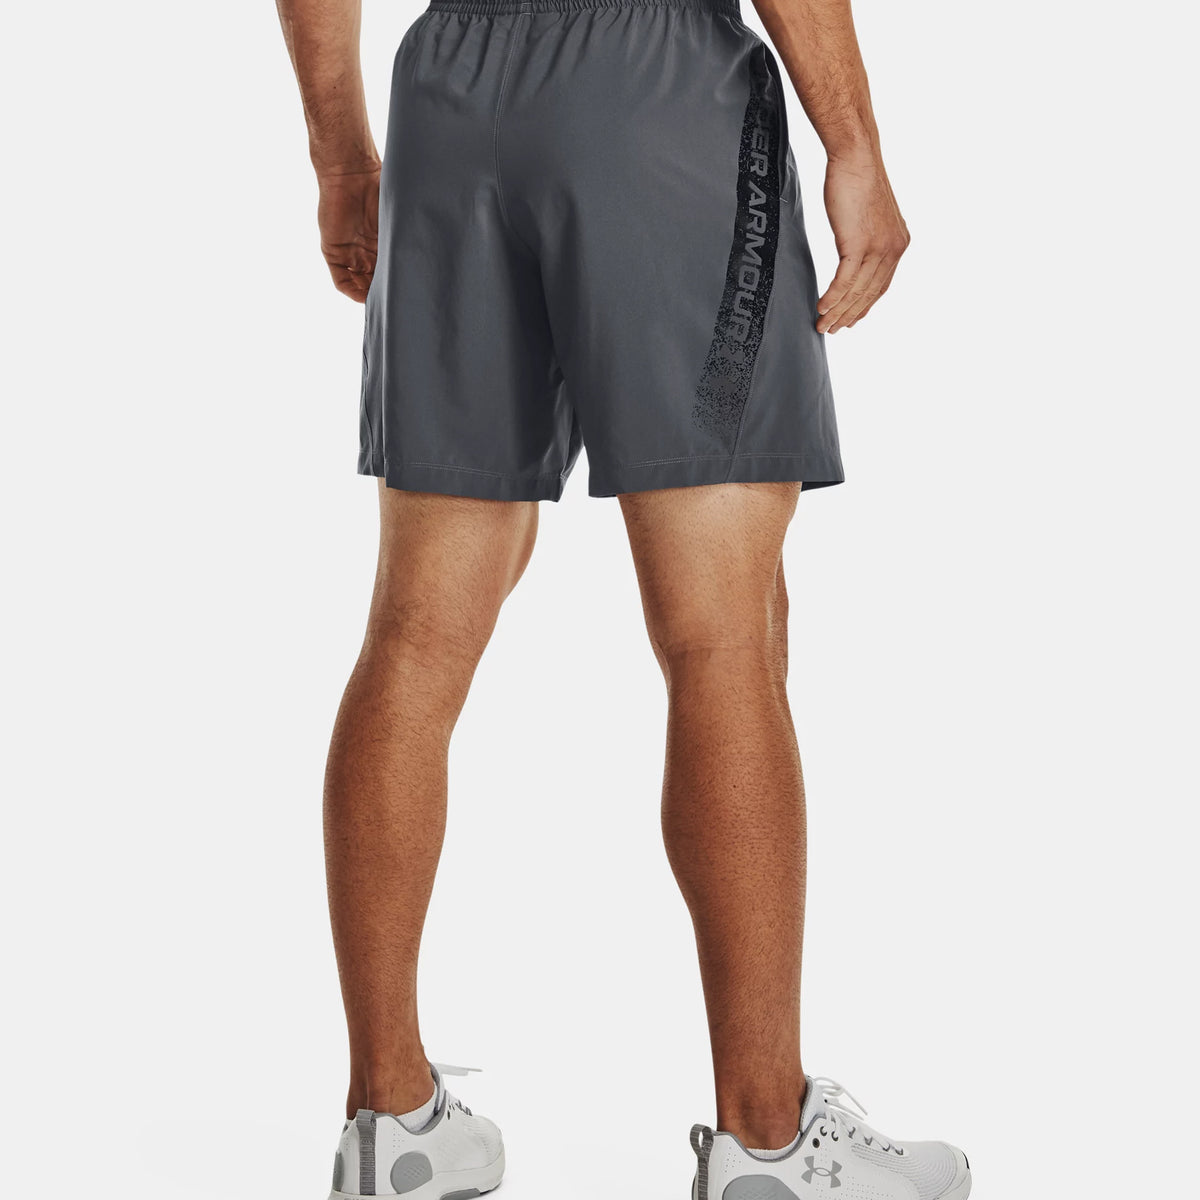 Under Armour Woven Graphic Shorts: Pitch Grey